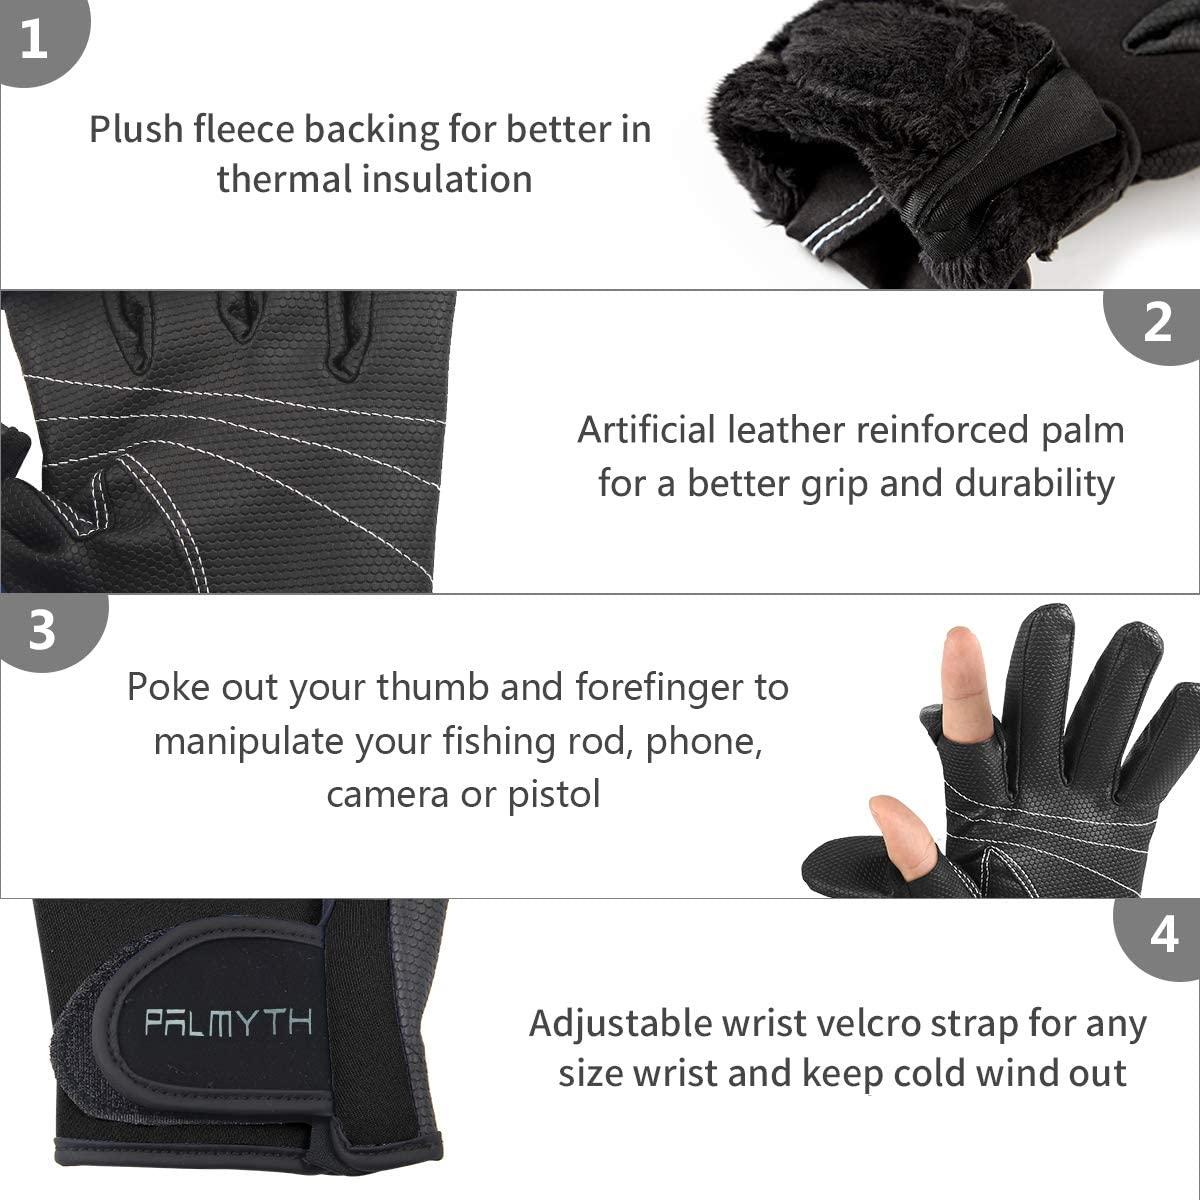 Palmyth Neoprene Fishing Gloves for Men and Women 2 Cut Fingers Flexible  Great for Photography Fly Fishing Ice Fishing Running Touchscreen Texting  Hiking Jogging Cycling Walking Black Medium